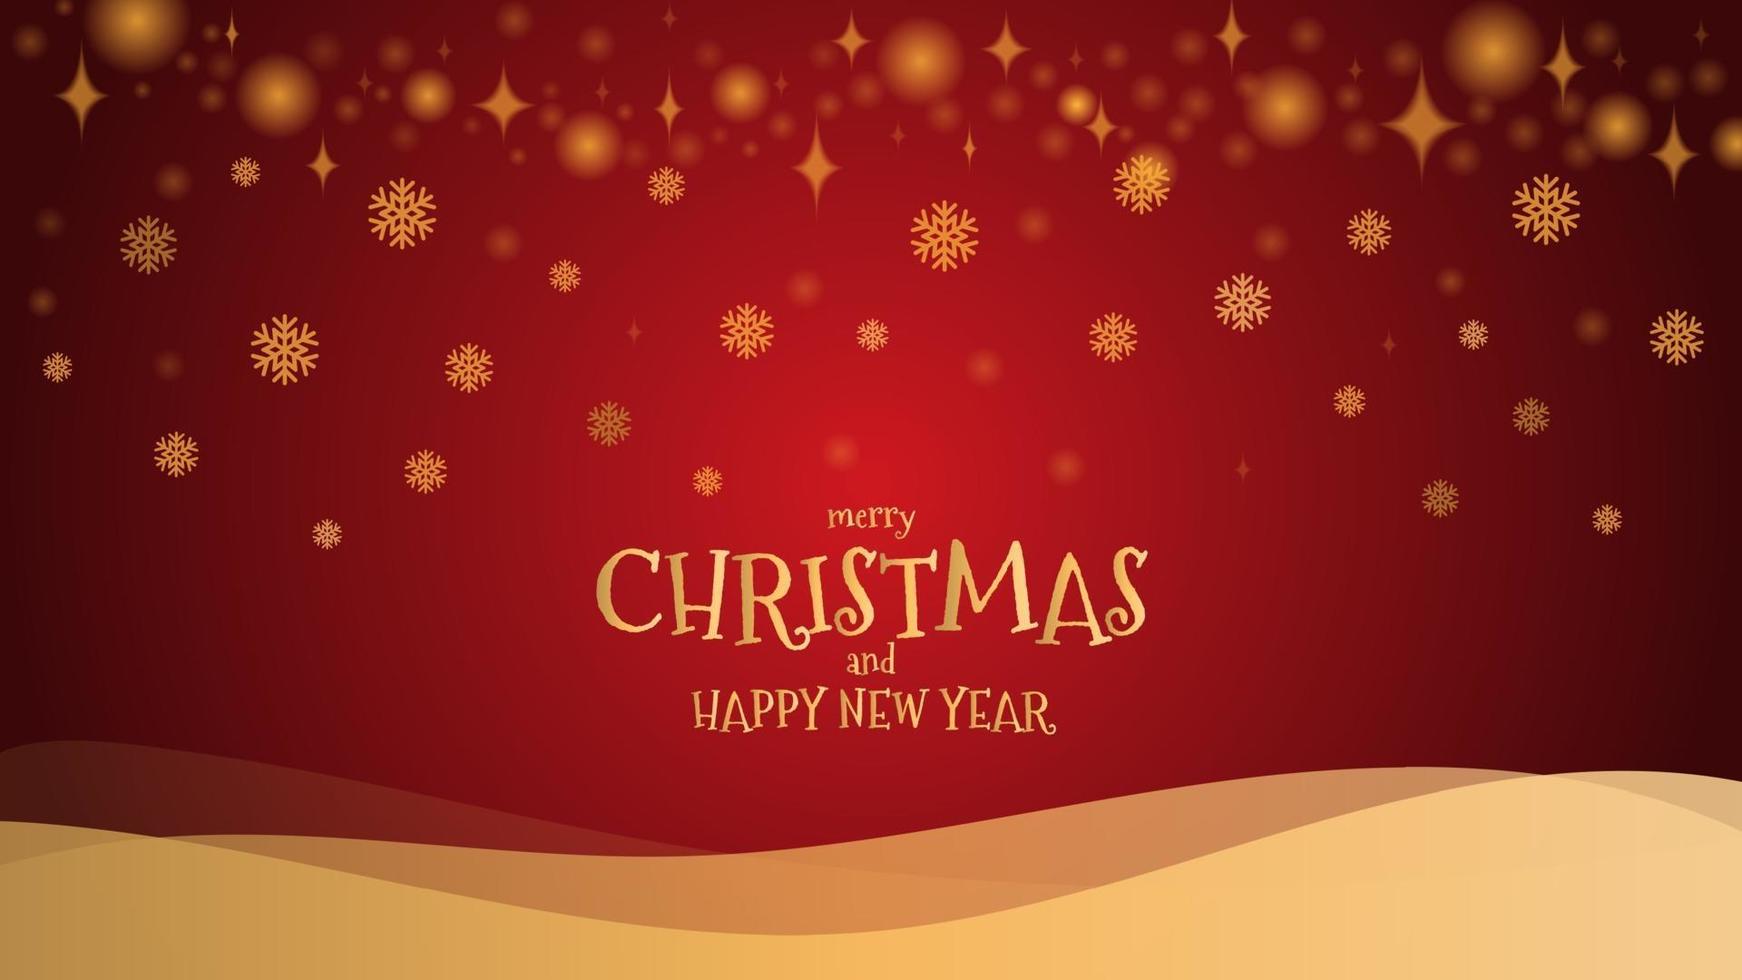 Gold glitter snowflake with mery christmas and happy new year on red background, vector illustration